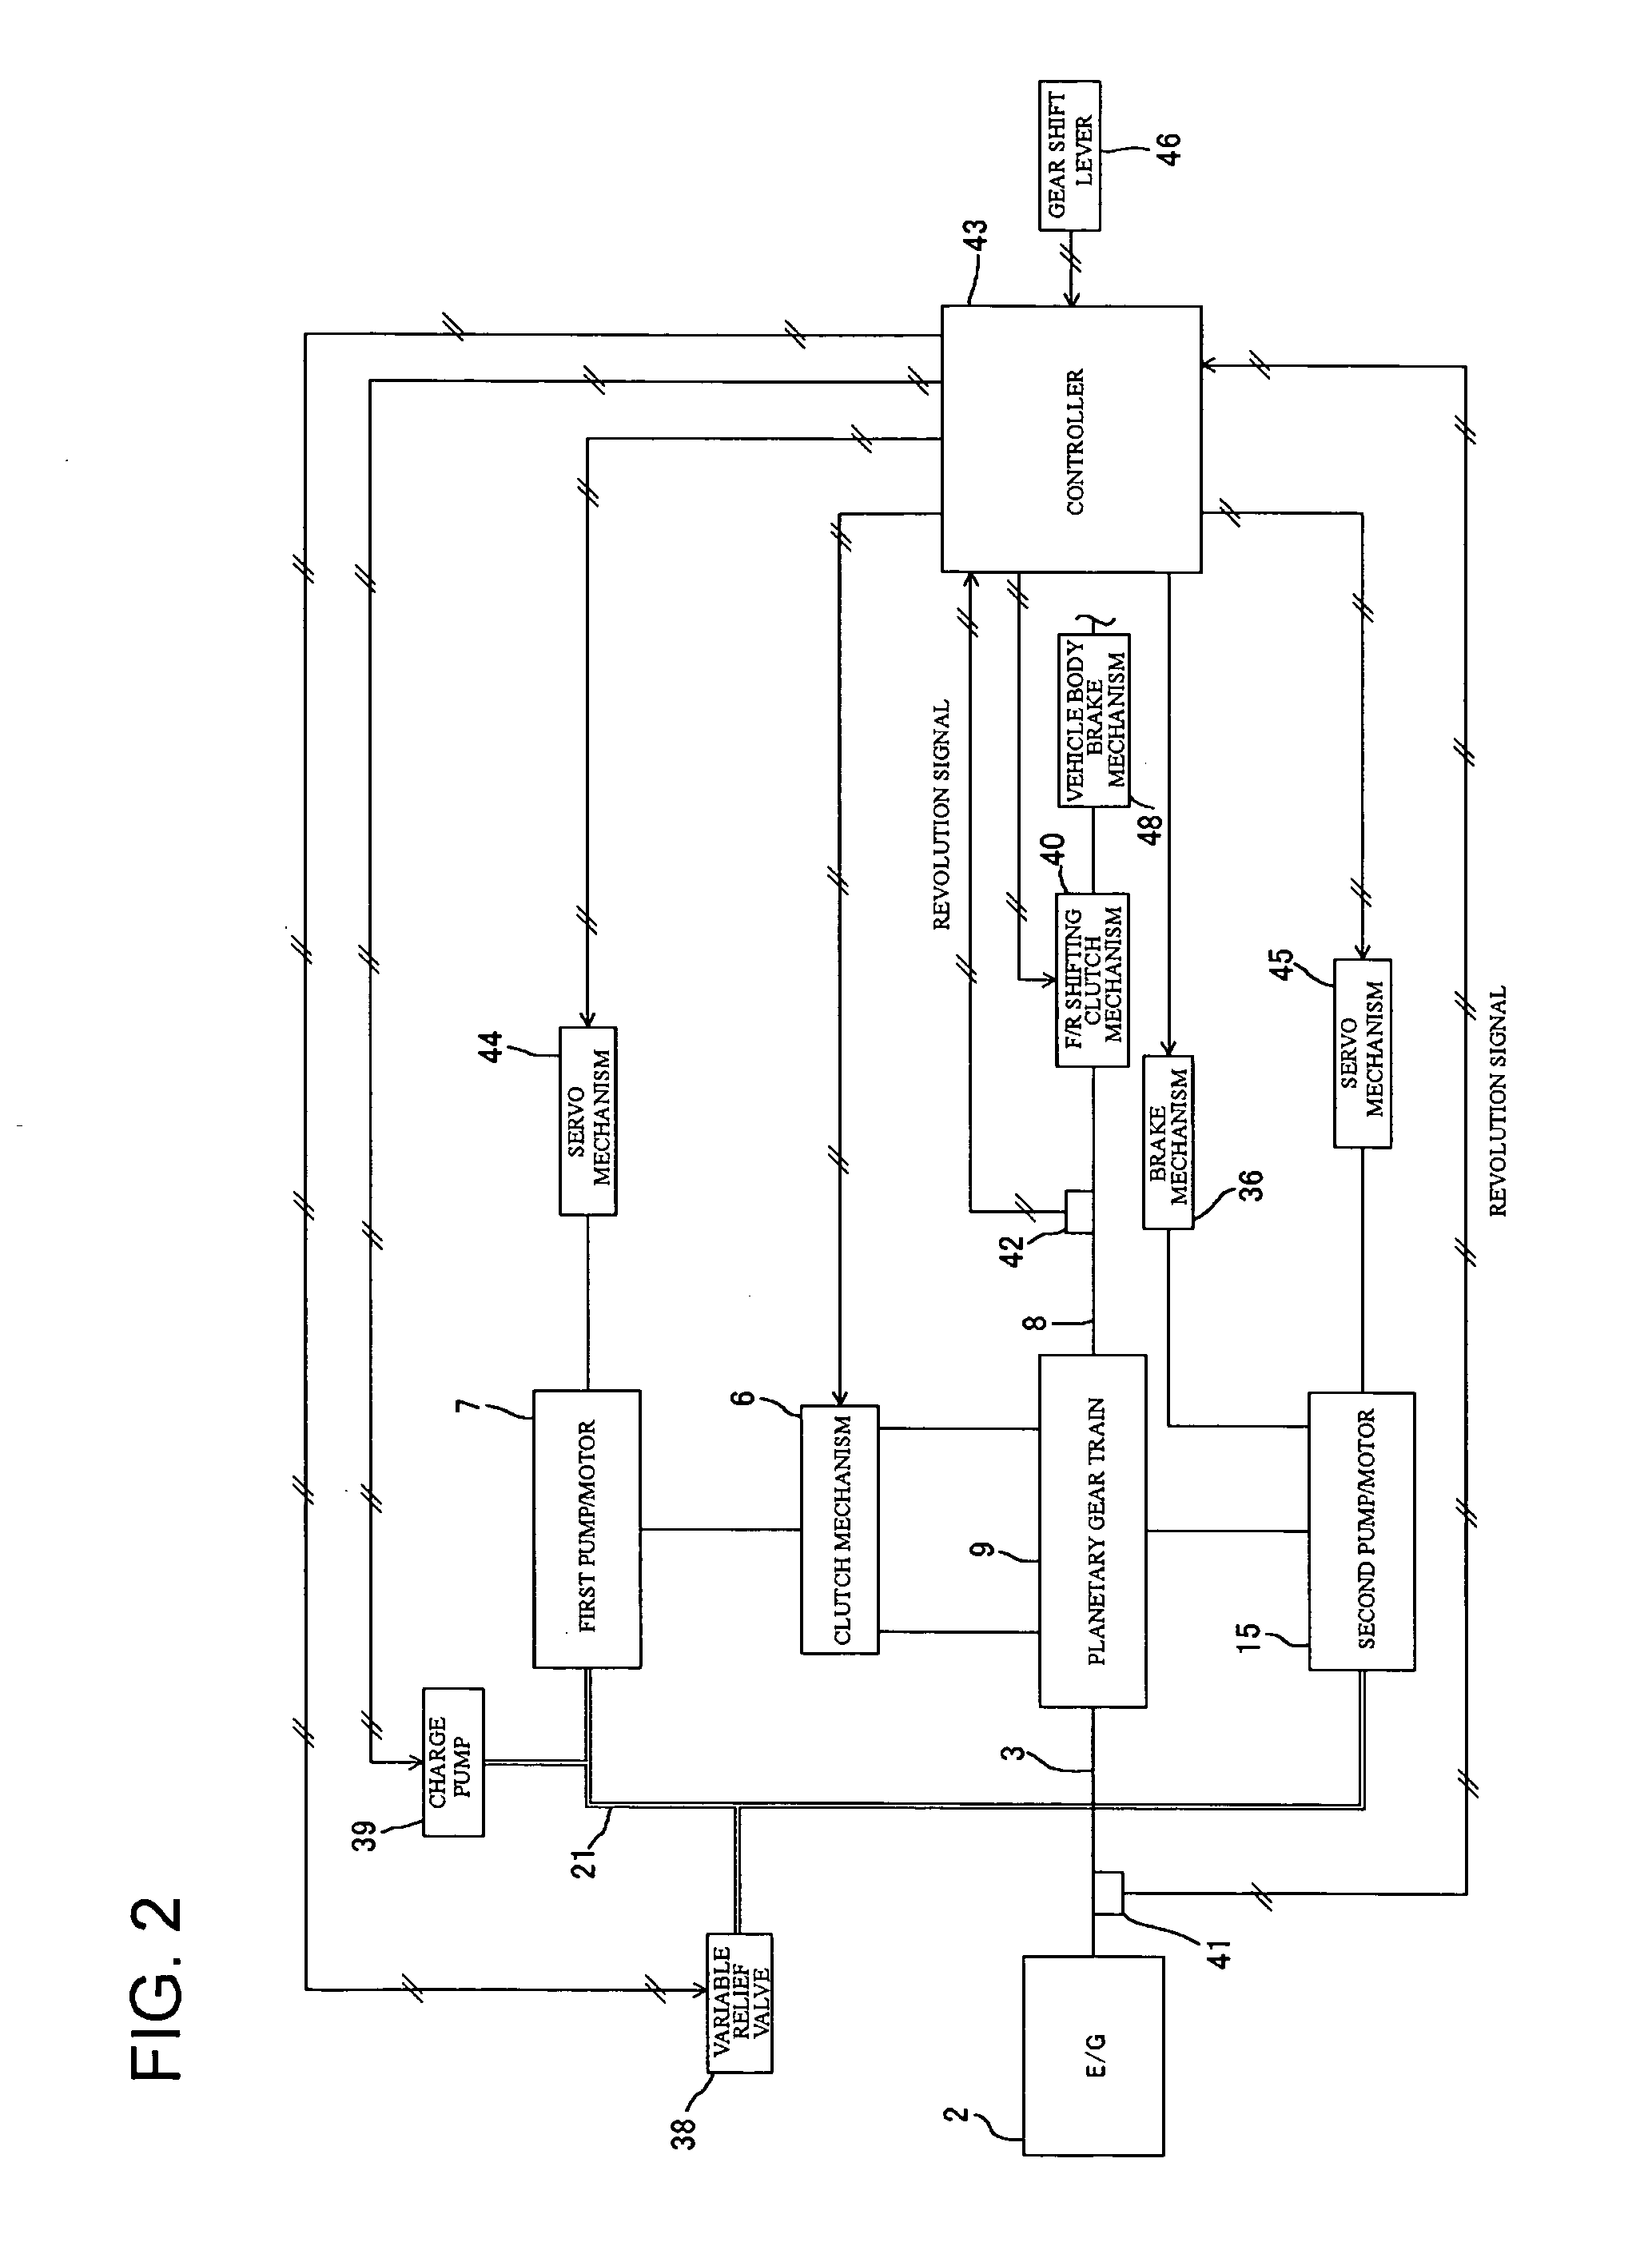 Control system for a hydro-mechanical transmission